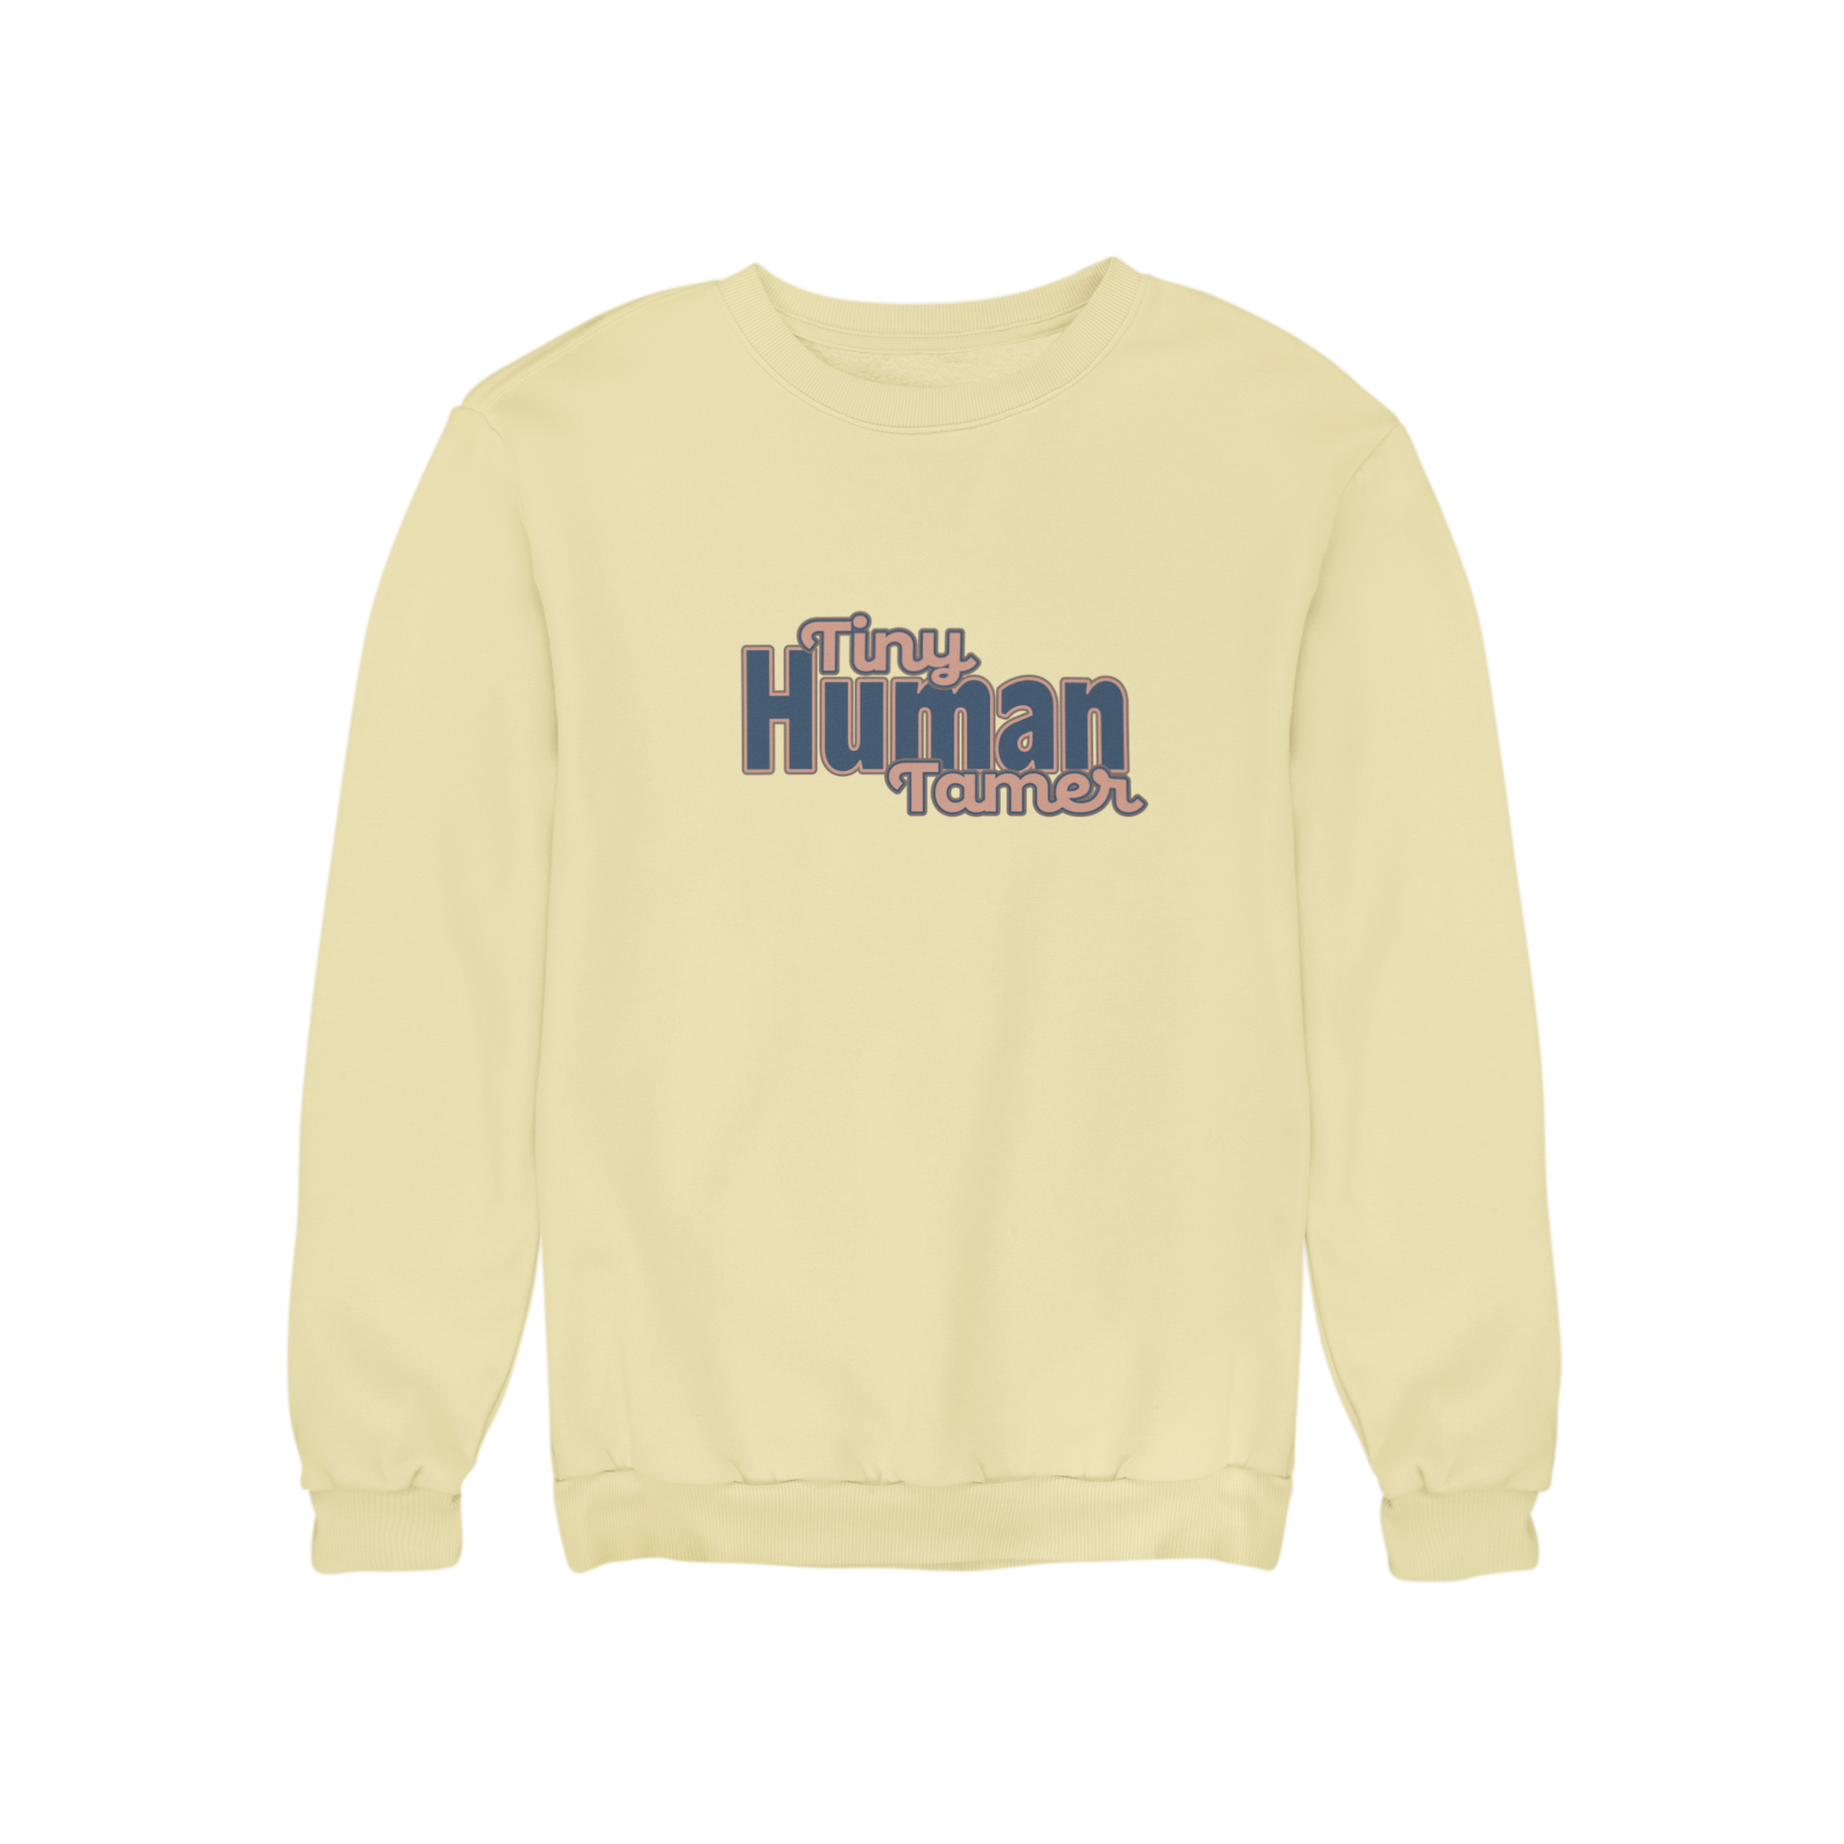 Looking for a unique sweatshirt for the tamer of tiny humans in your life? Check out Teevolution's "Tiny Human Tamer" sweatshirt! It's perfect for parents, nannies, and anyone who works with kids. Get yours today and show off your taming skills!